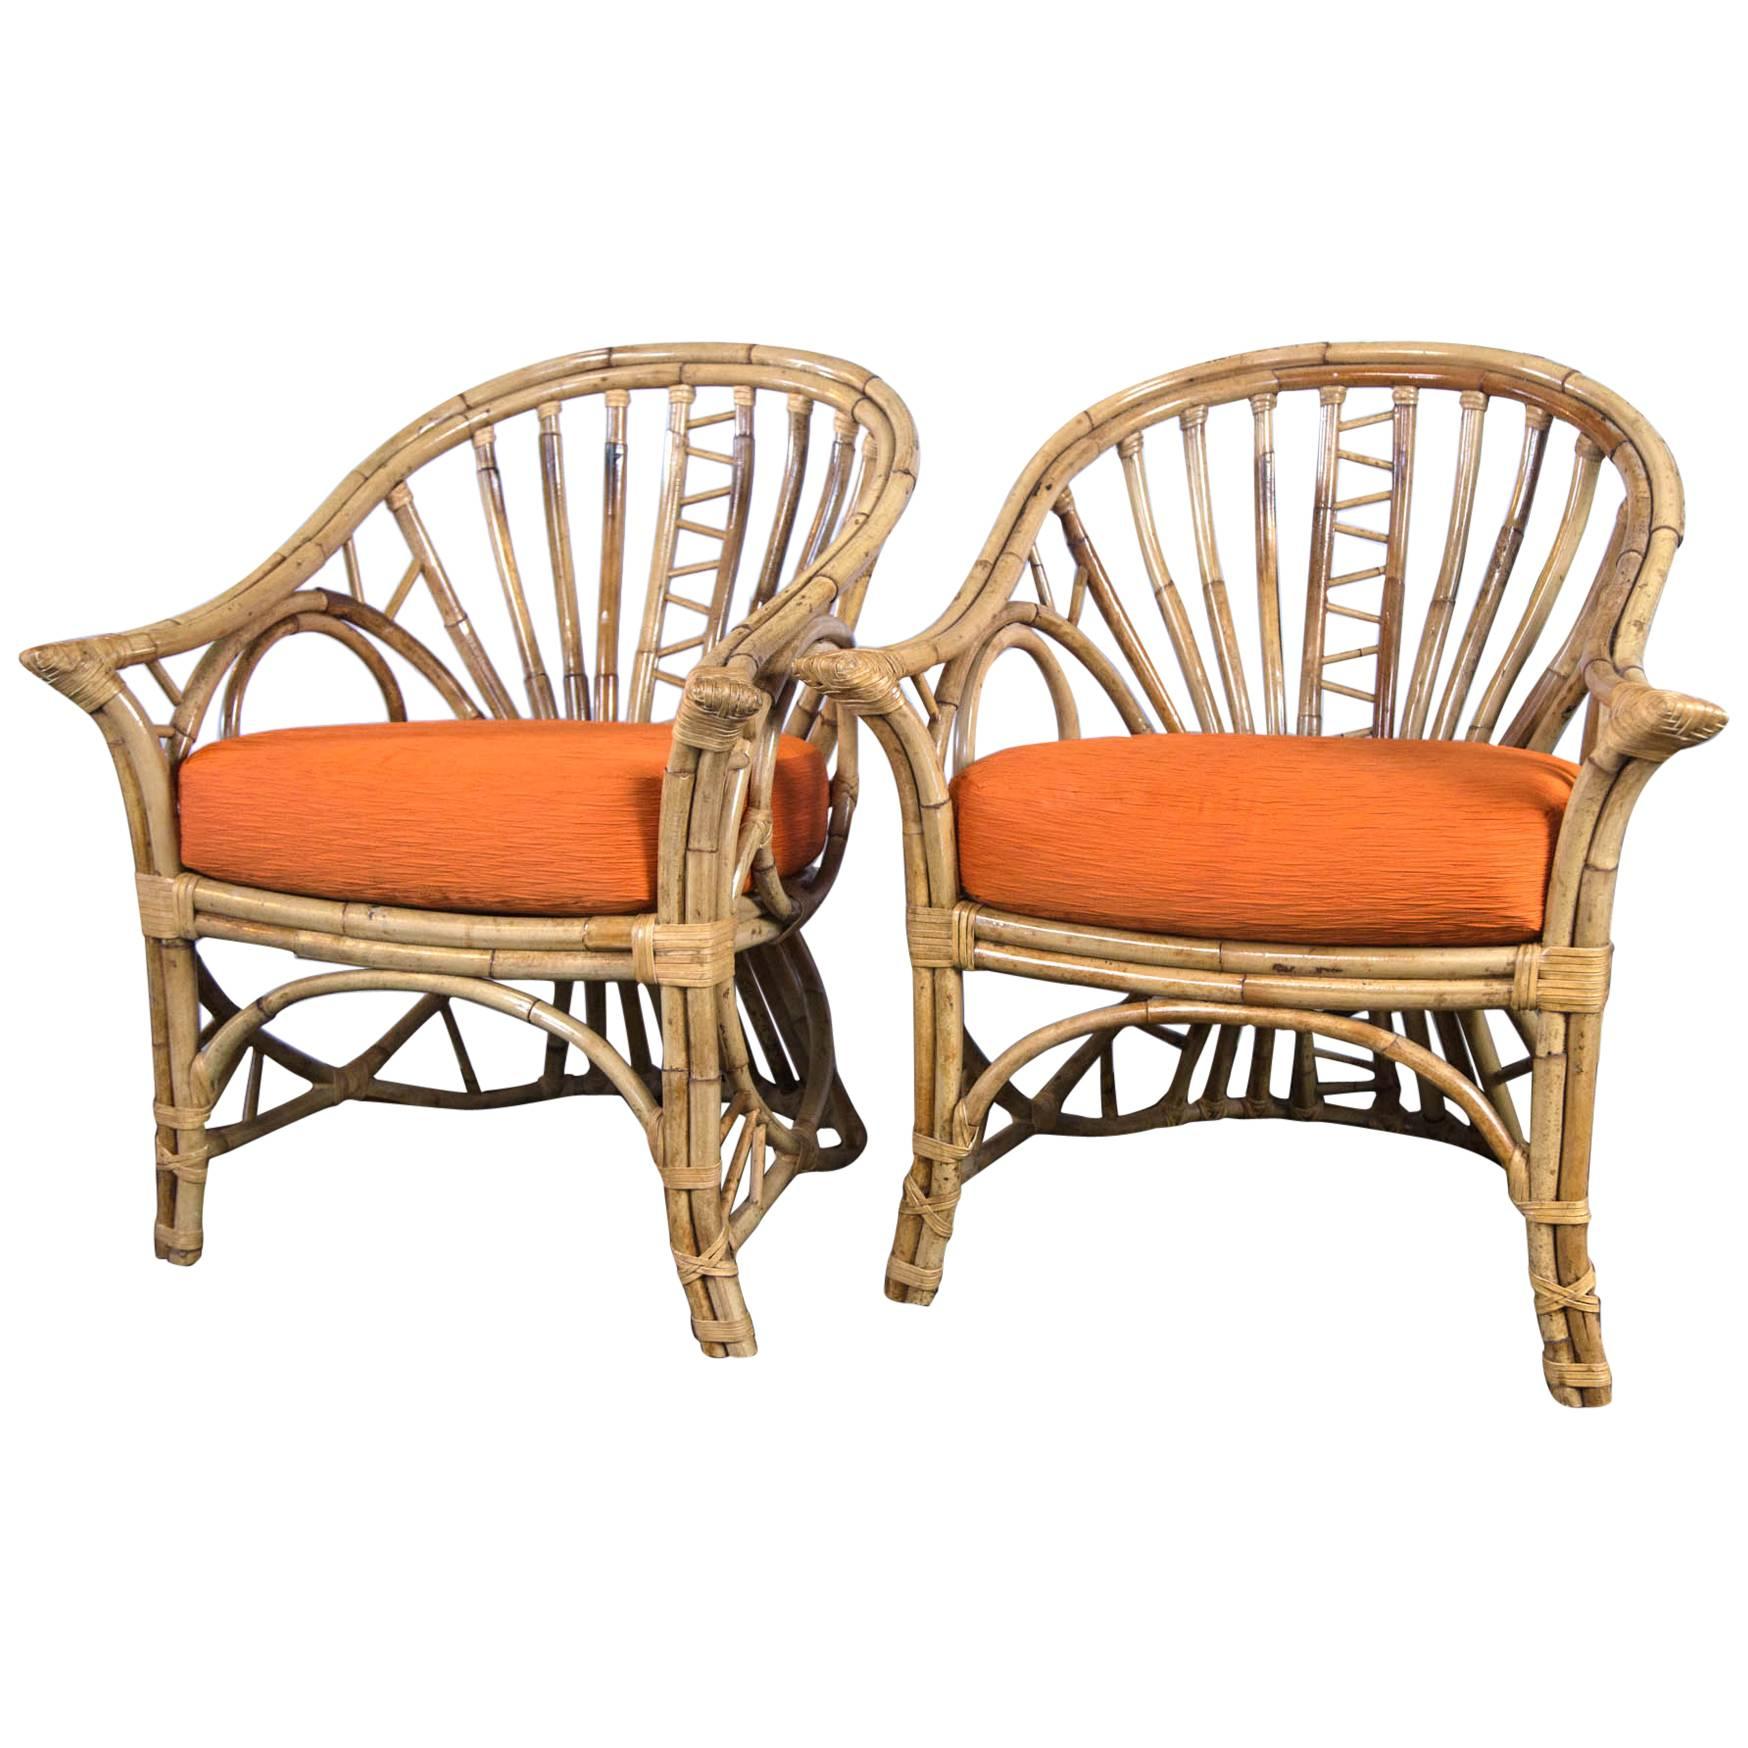 Pair of Midcentury Circle Sided Rattan Arm Chairs